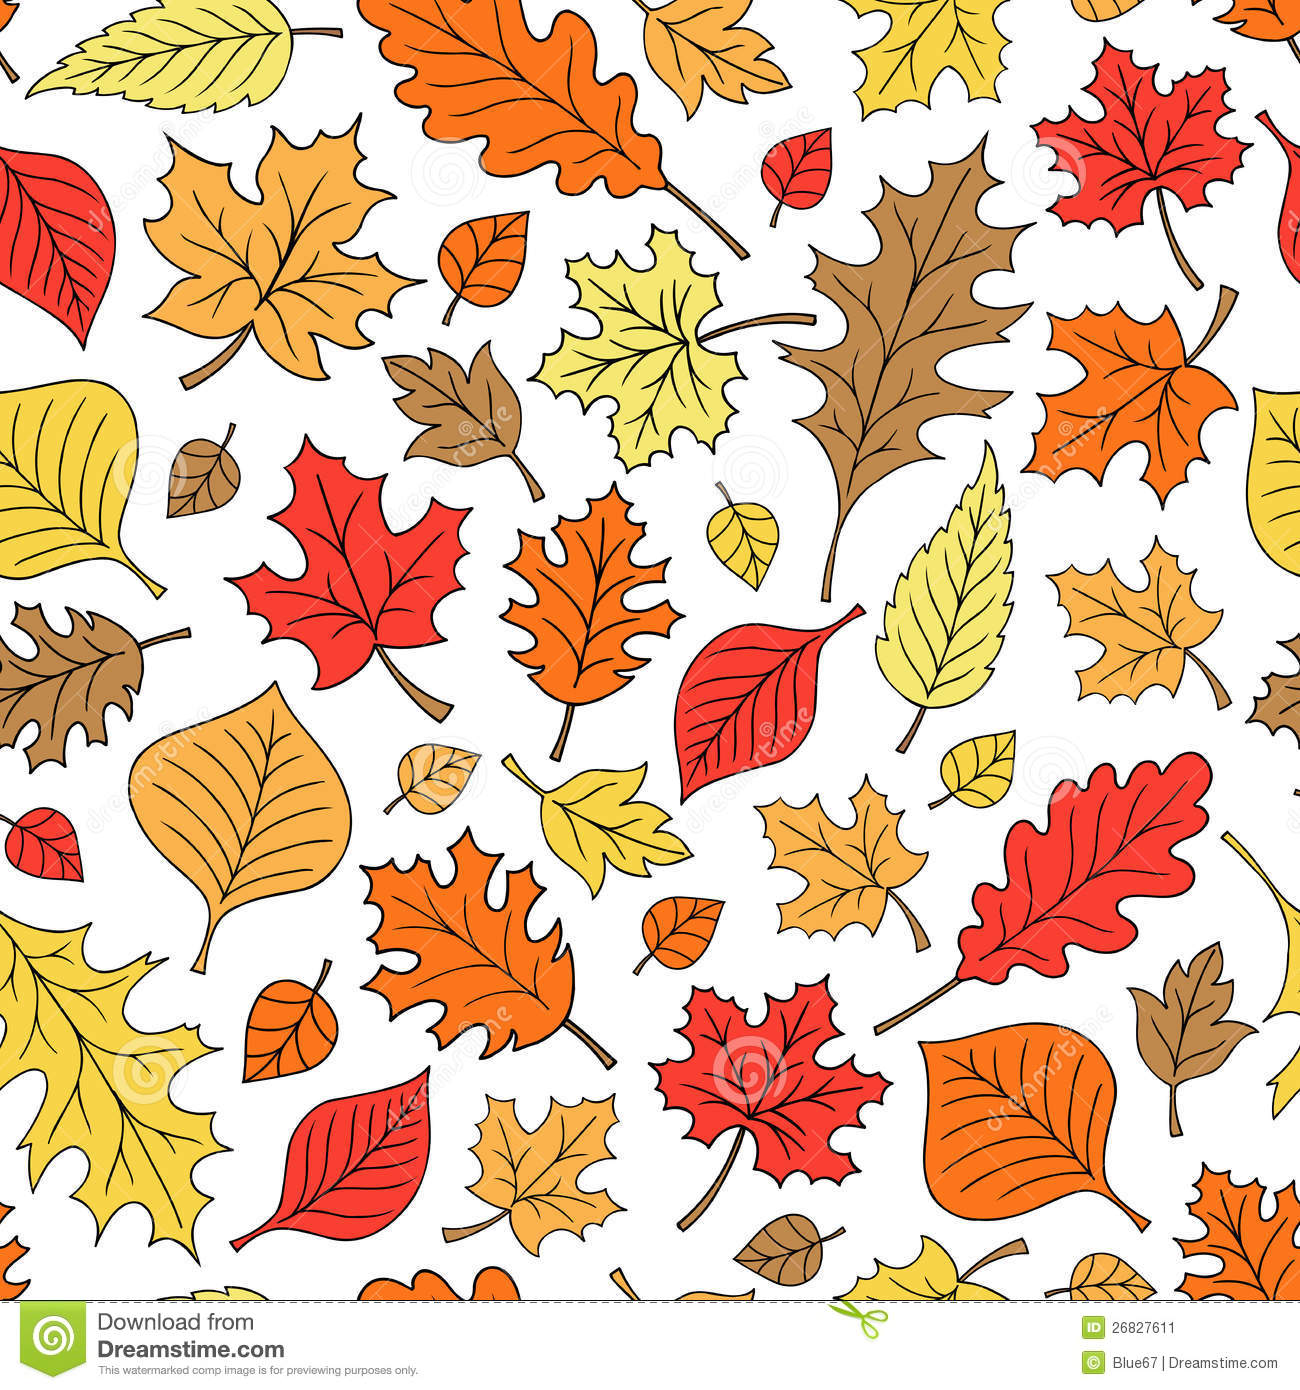 Autumn Fall Leaves Patterns